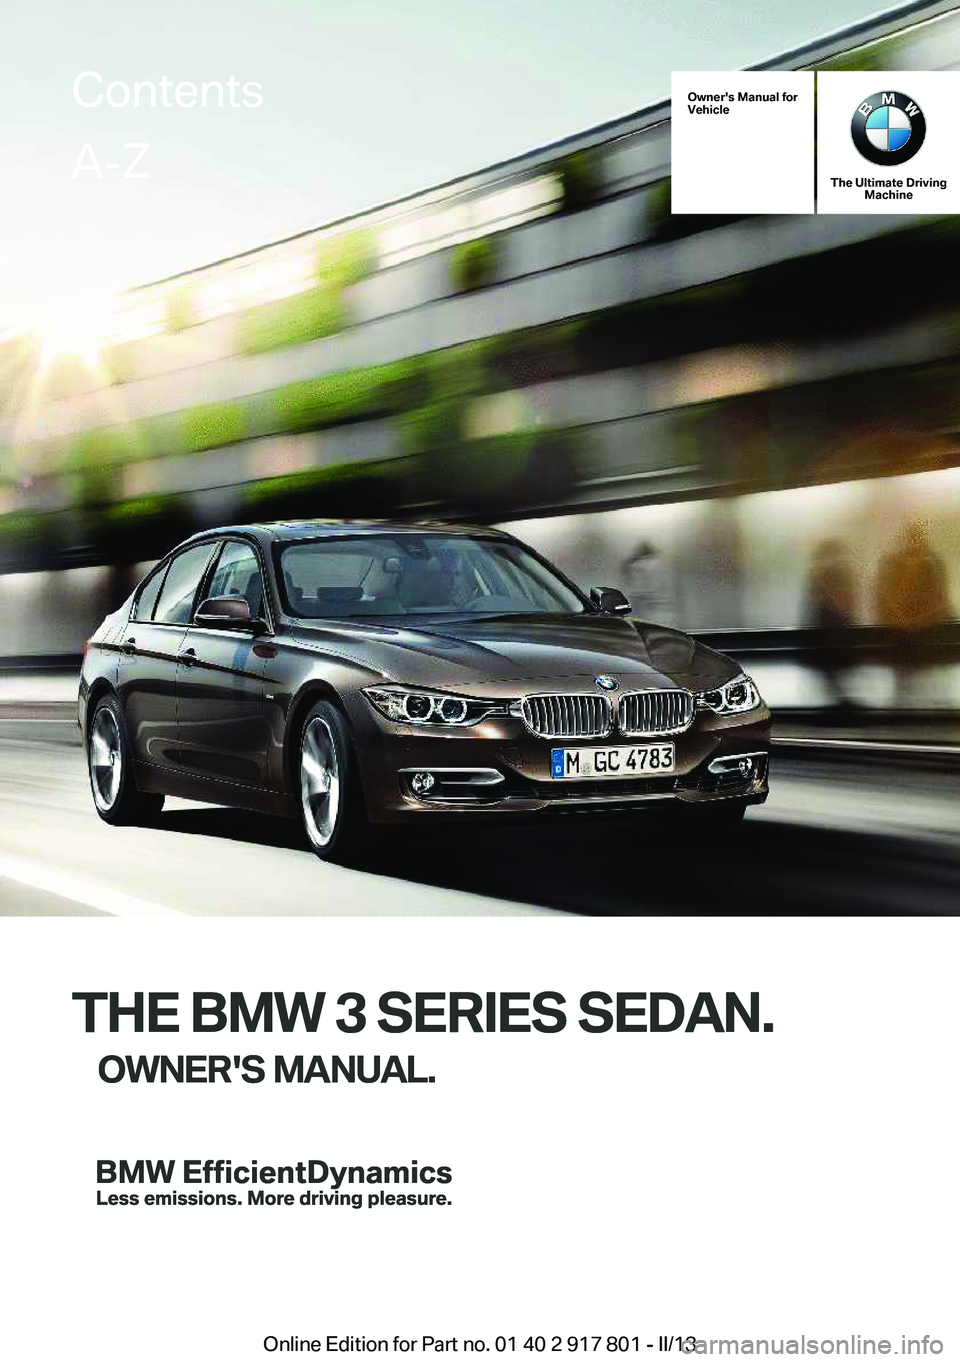 BMW 335I 2013  Owners Manual Owner's Manual for
Vehicle
THE BMW 3 SERIES SEDAN.
OWNER'S MANUAL.
The Ultimate Driving Machine
THE BMW 3 SERIES SEDAN.
OWNER'S MANUAL.
ContentsA-Z
Online Edition for Part no. 01 40 2 917 